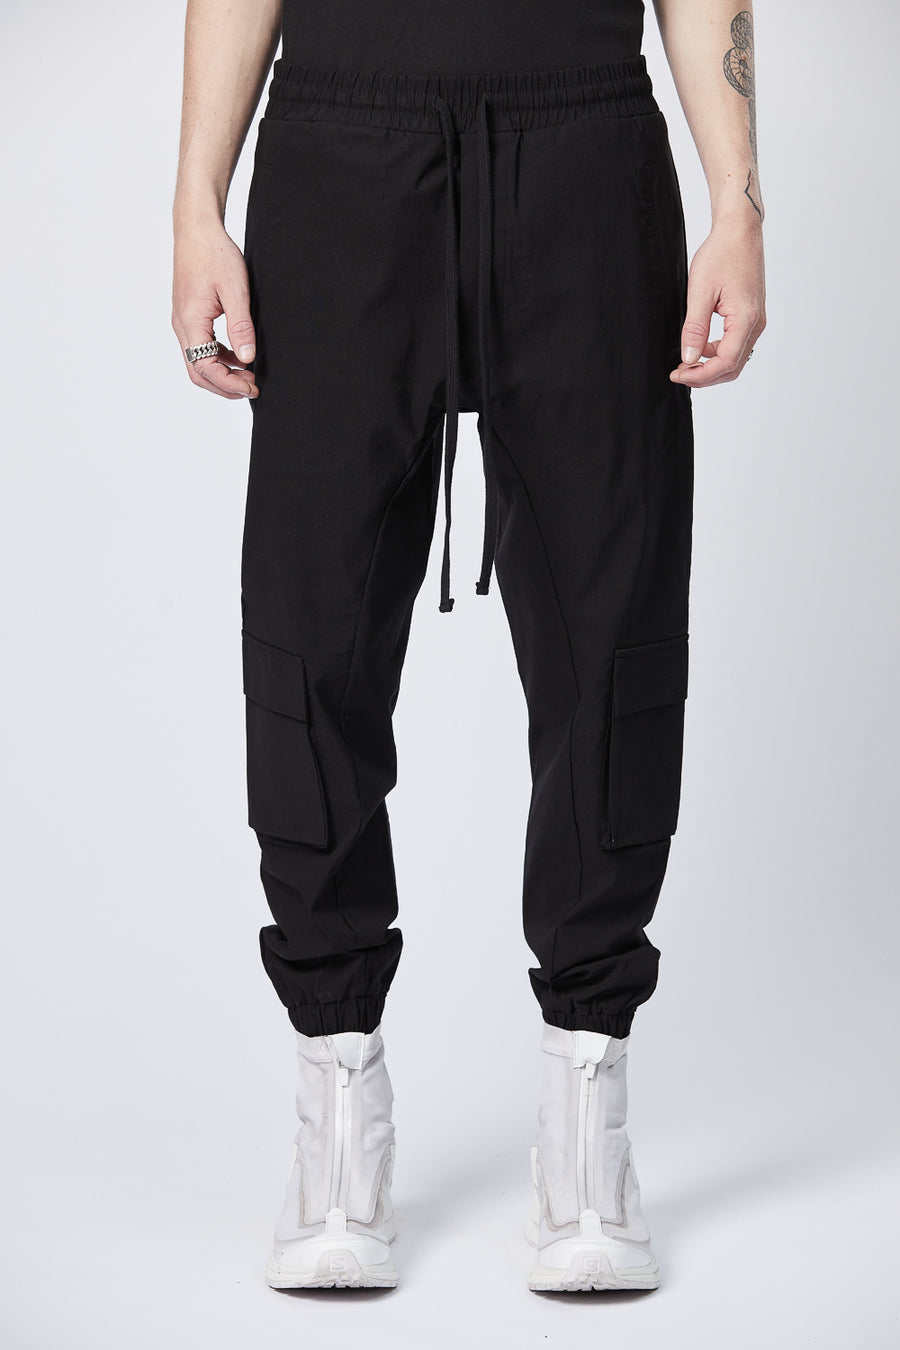 Buy the Thom Krom M ST 436 Sweatpants in Black at Intro. Spend £50 for free UK delivery. Official stockists. We ship worldwide.